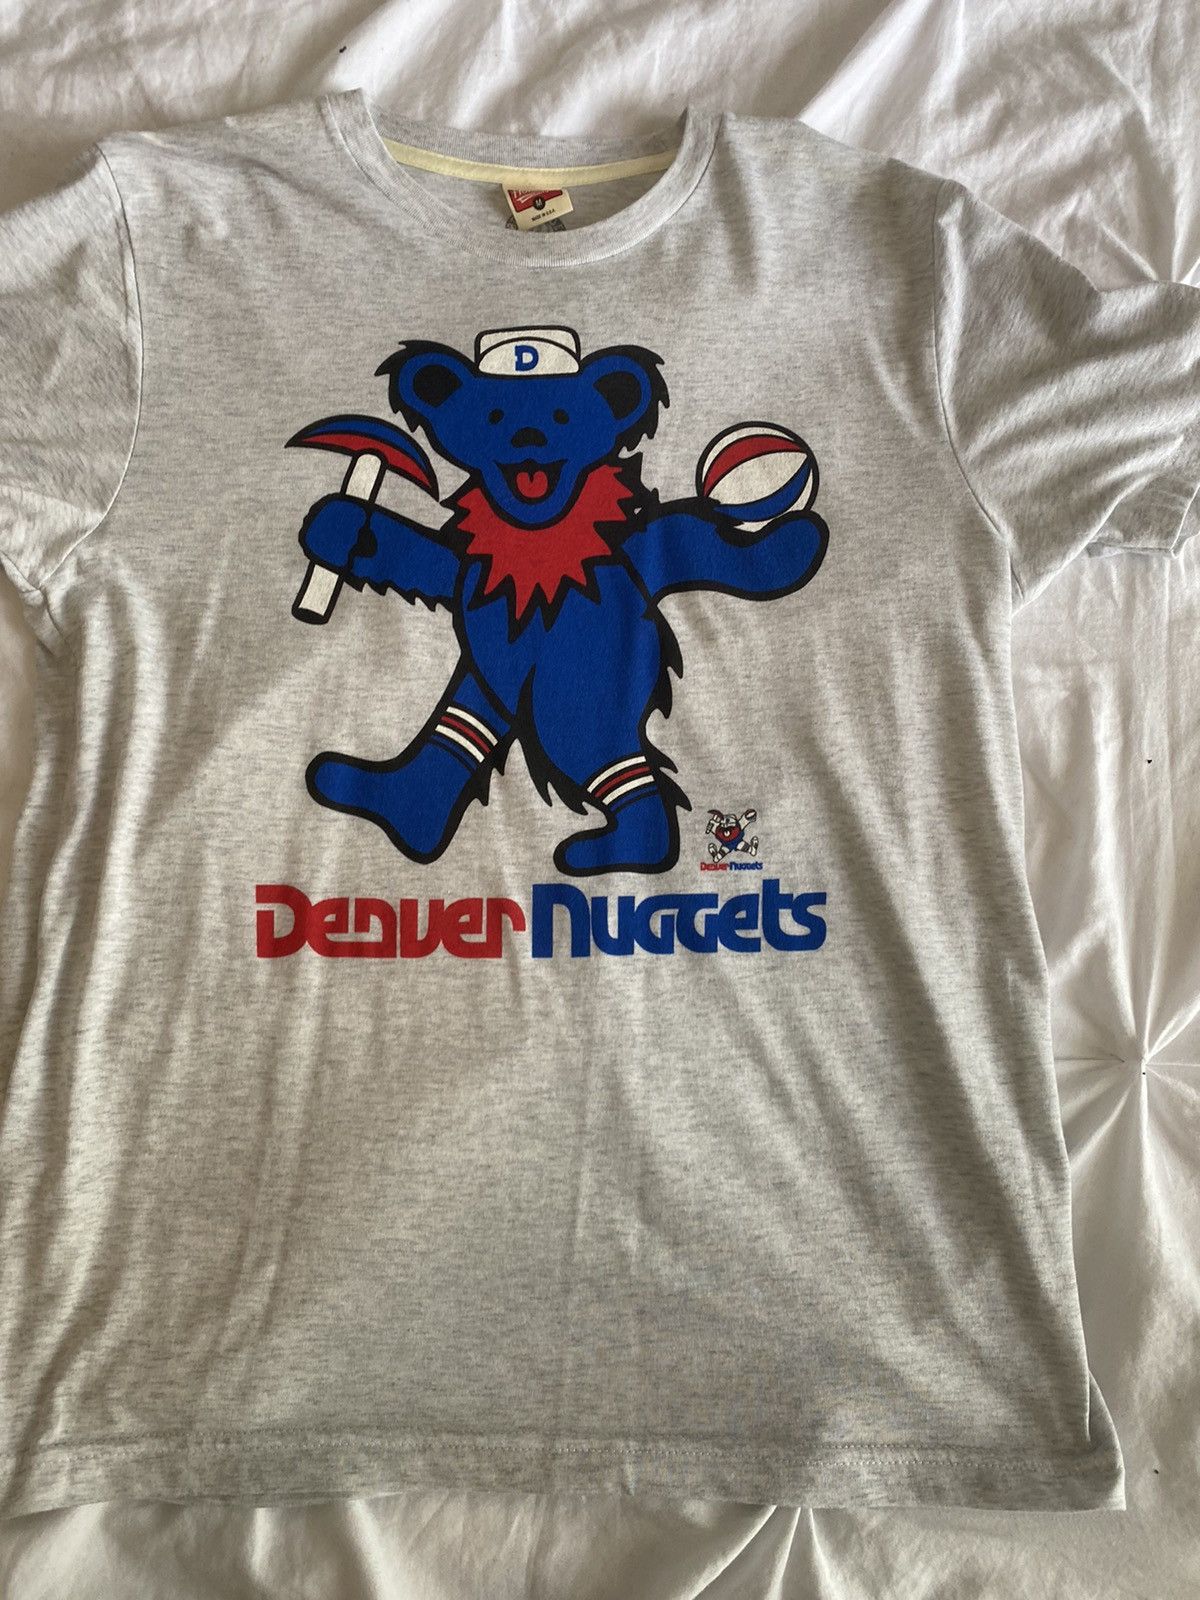 NBA x Grateful Dead x Nuggets Bear T-Shirt from Homage. | Gold | Vintage Apparel from Homage.